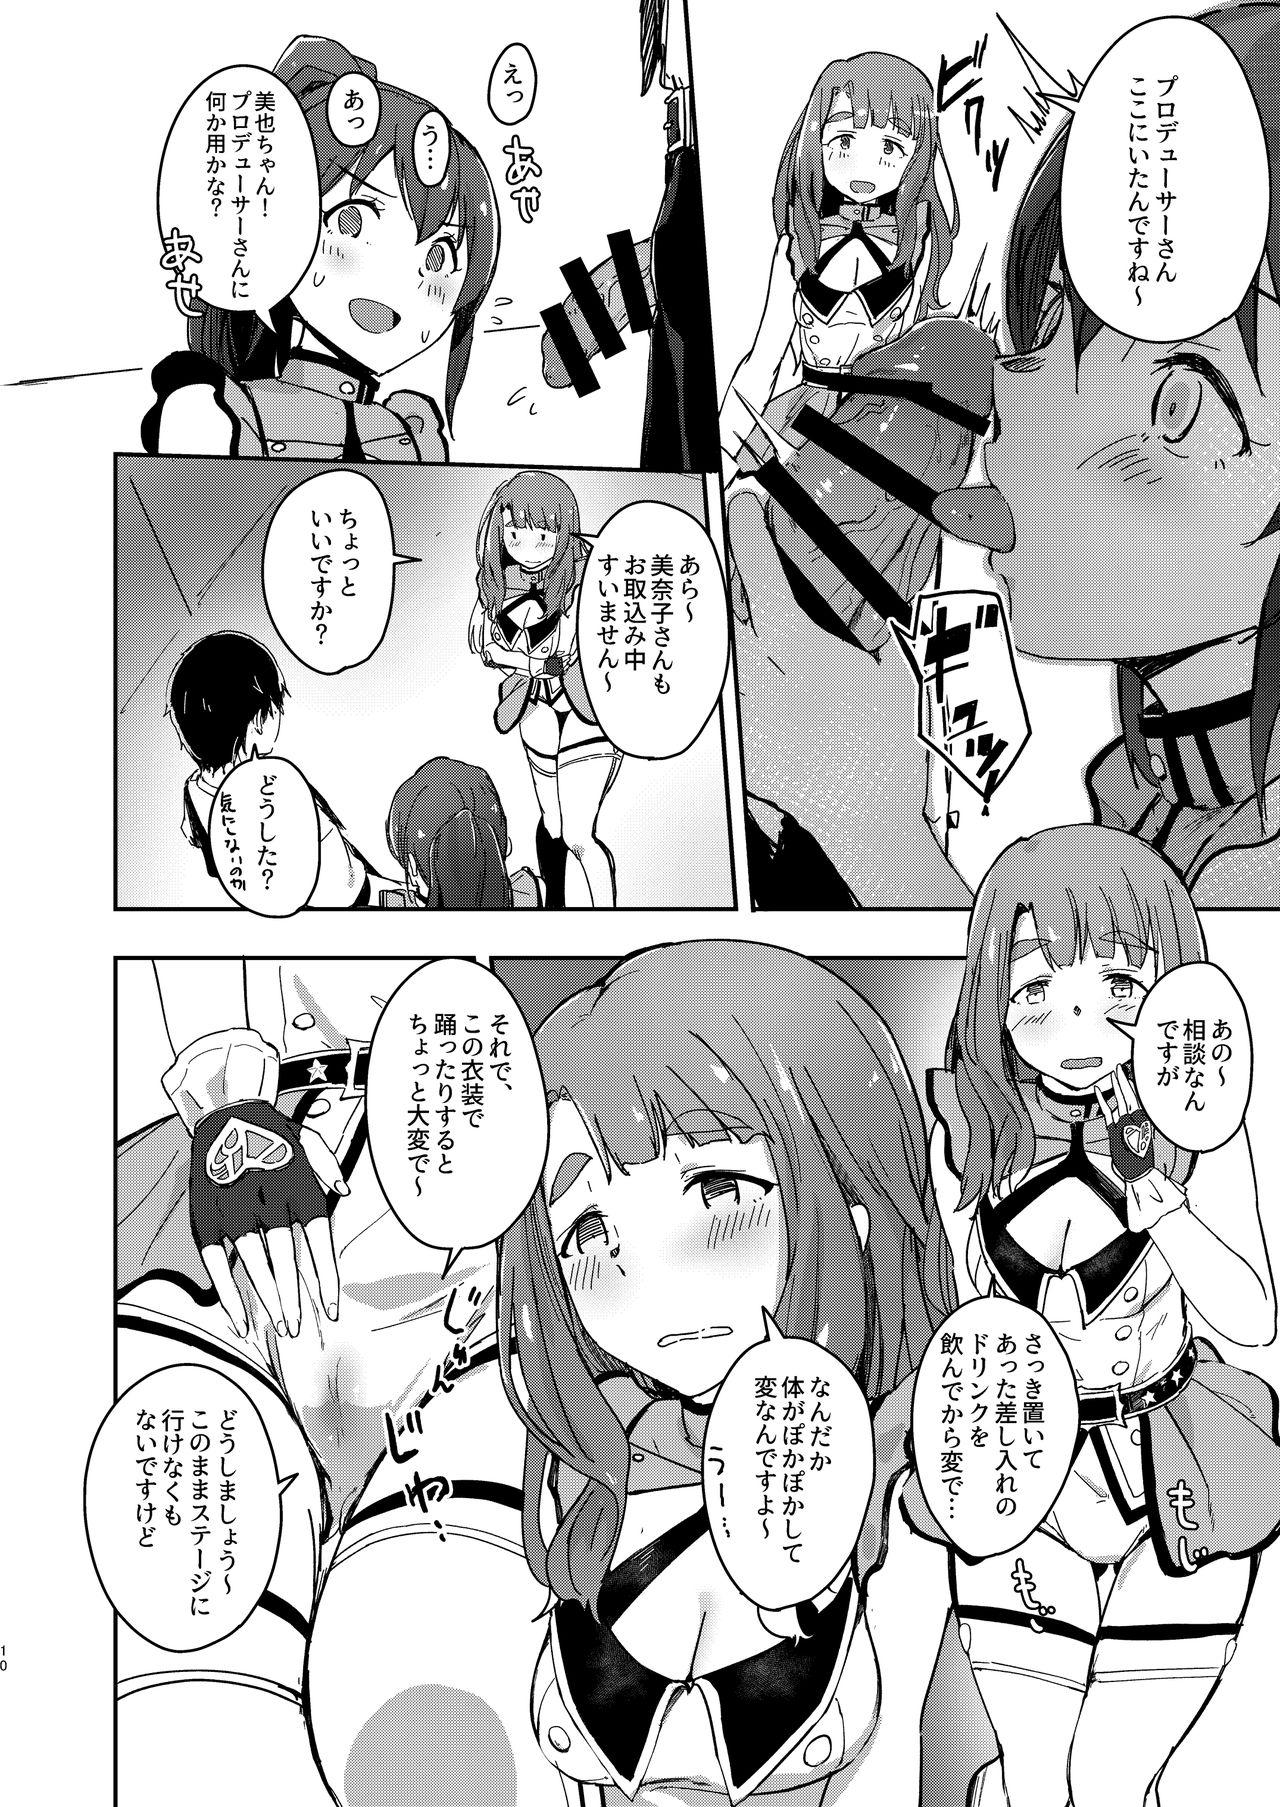 Kiss TOP! CLOVER BOOK + omake - The idolmaster Assfuck - Page 9